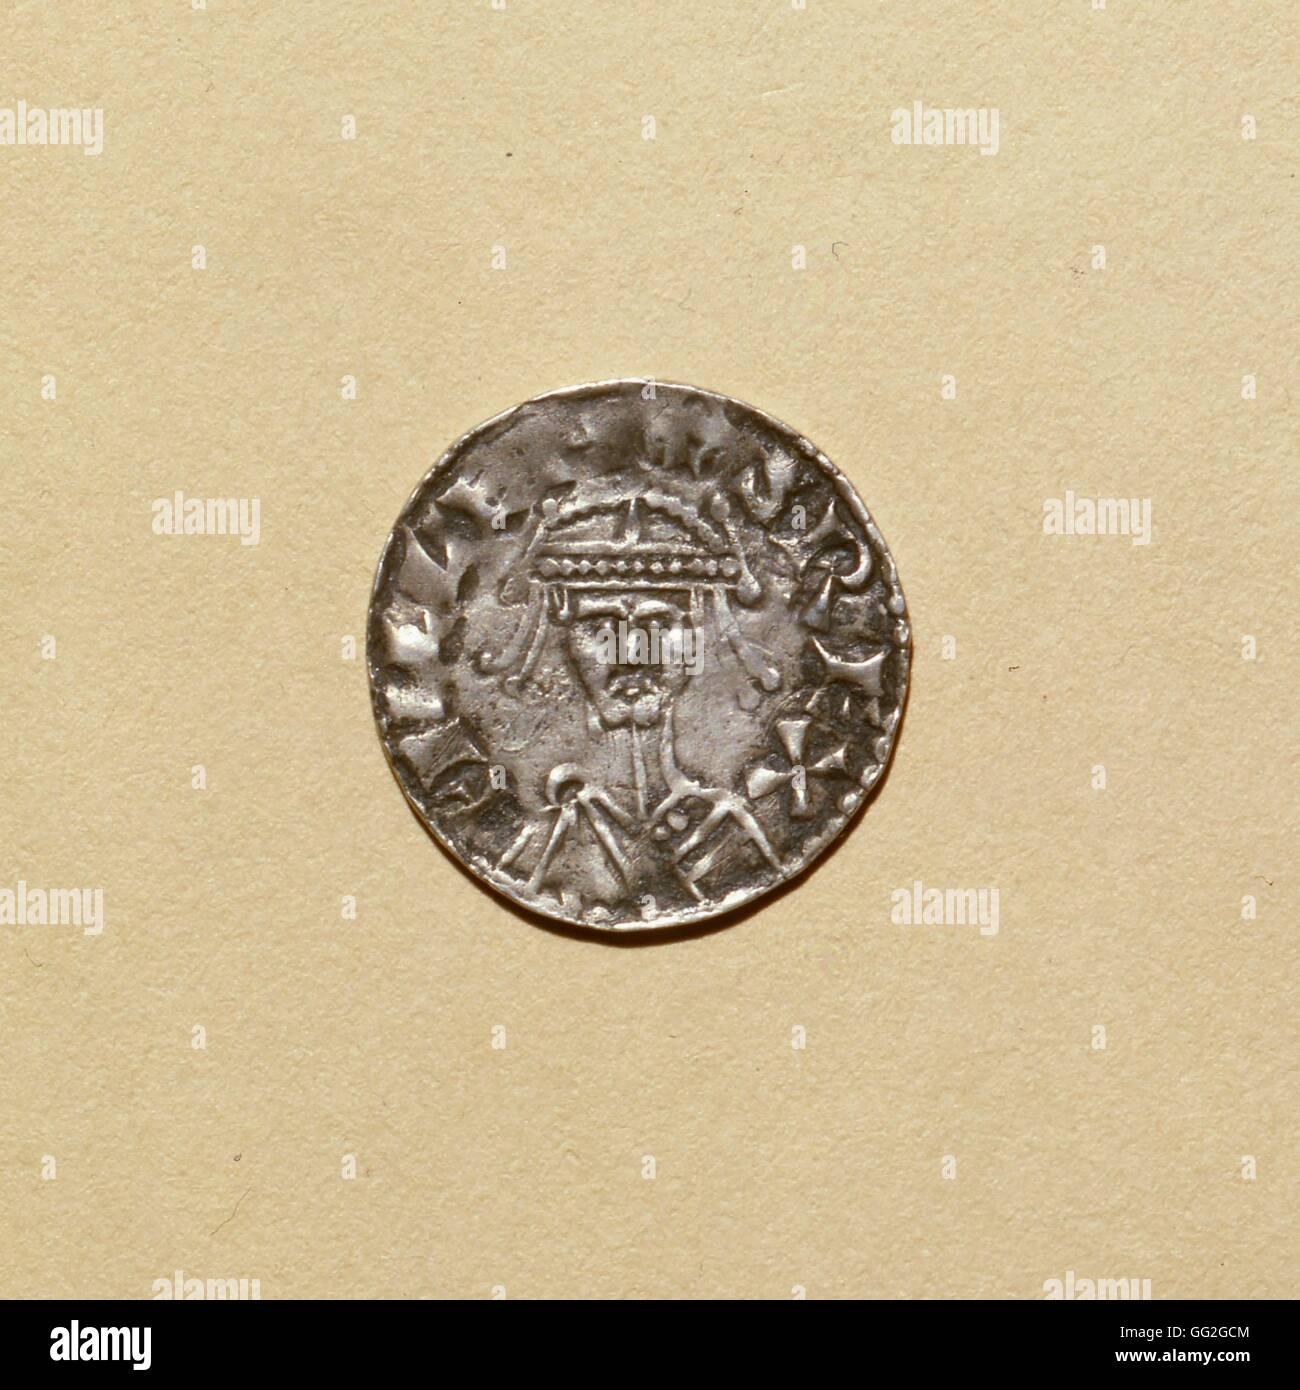 Recto of a silver denier from William the Conqueror, duke of Normandy and king of England. 11th century Stock Photo